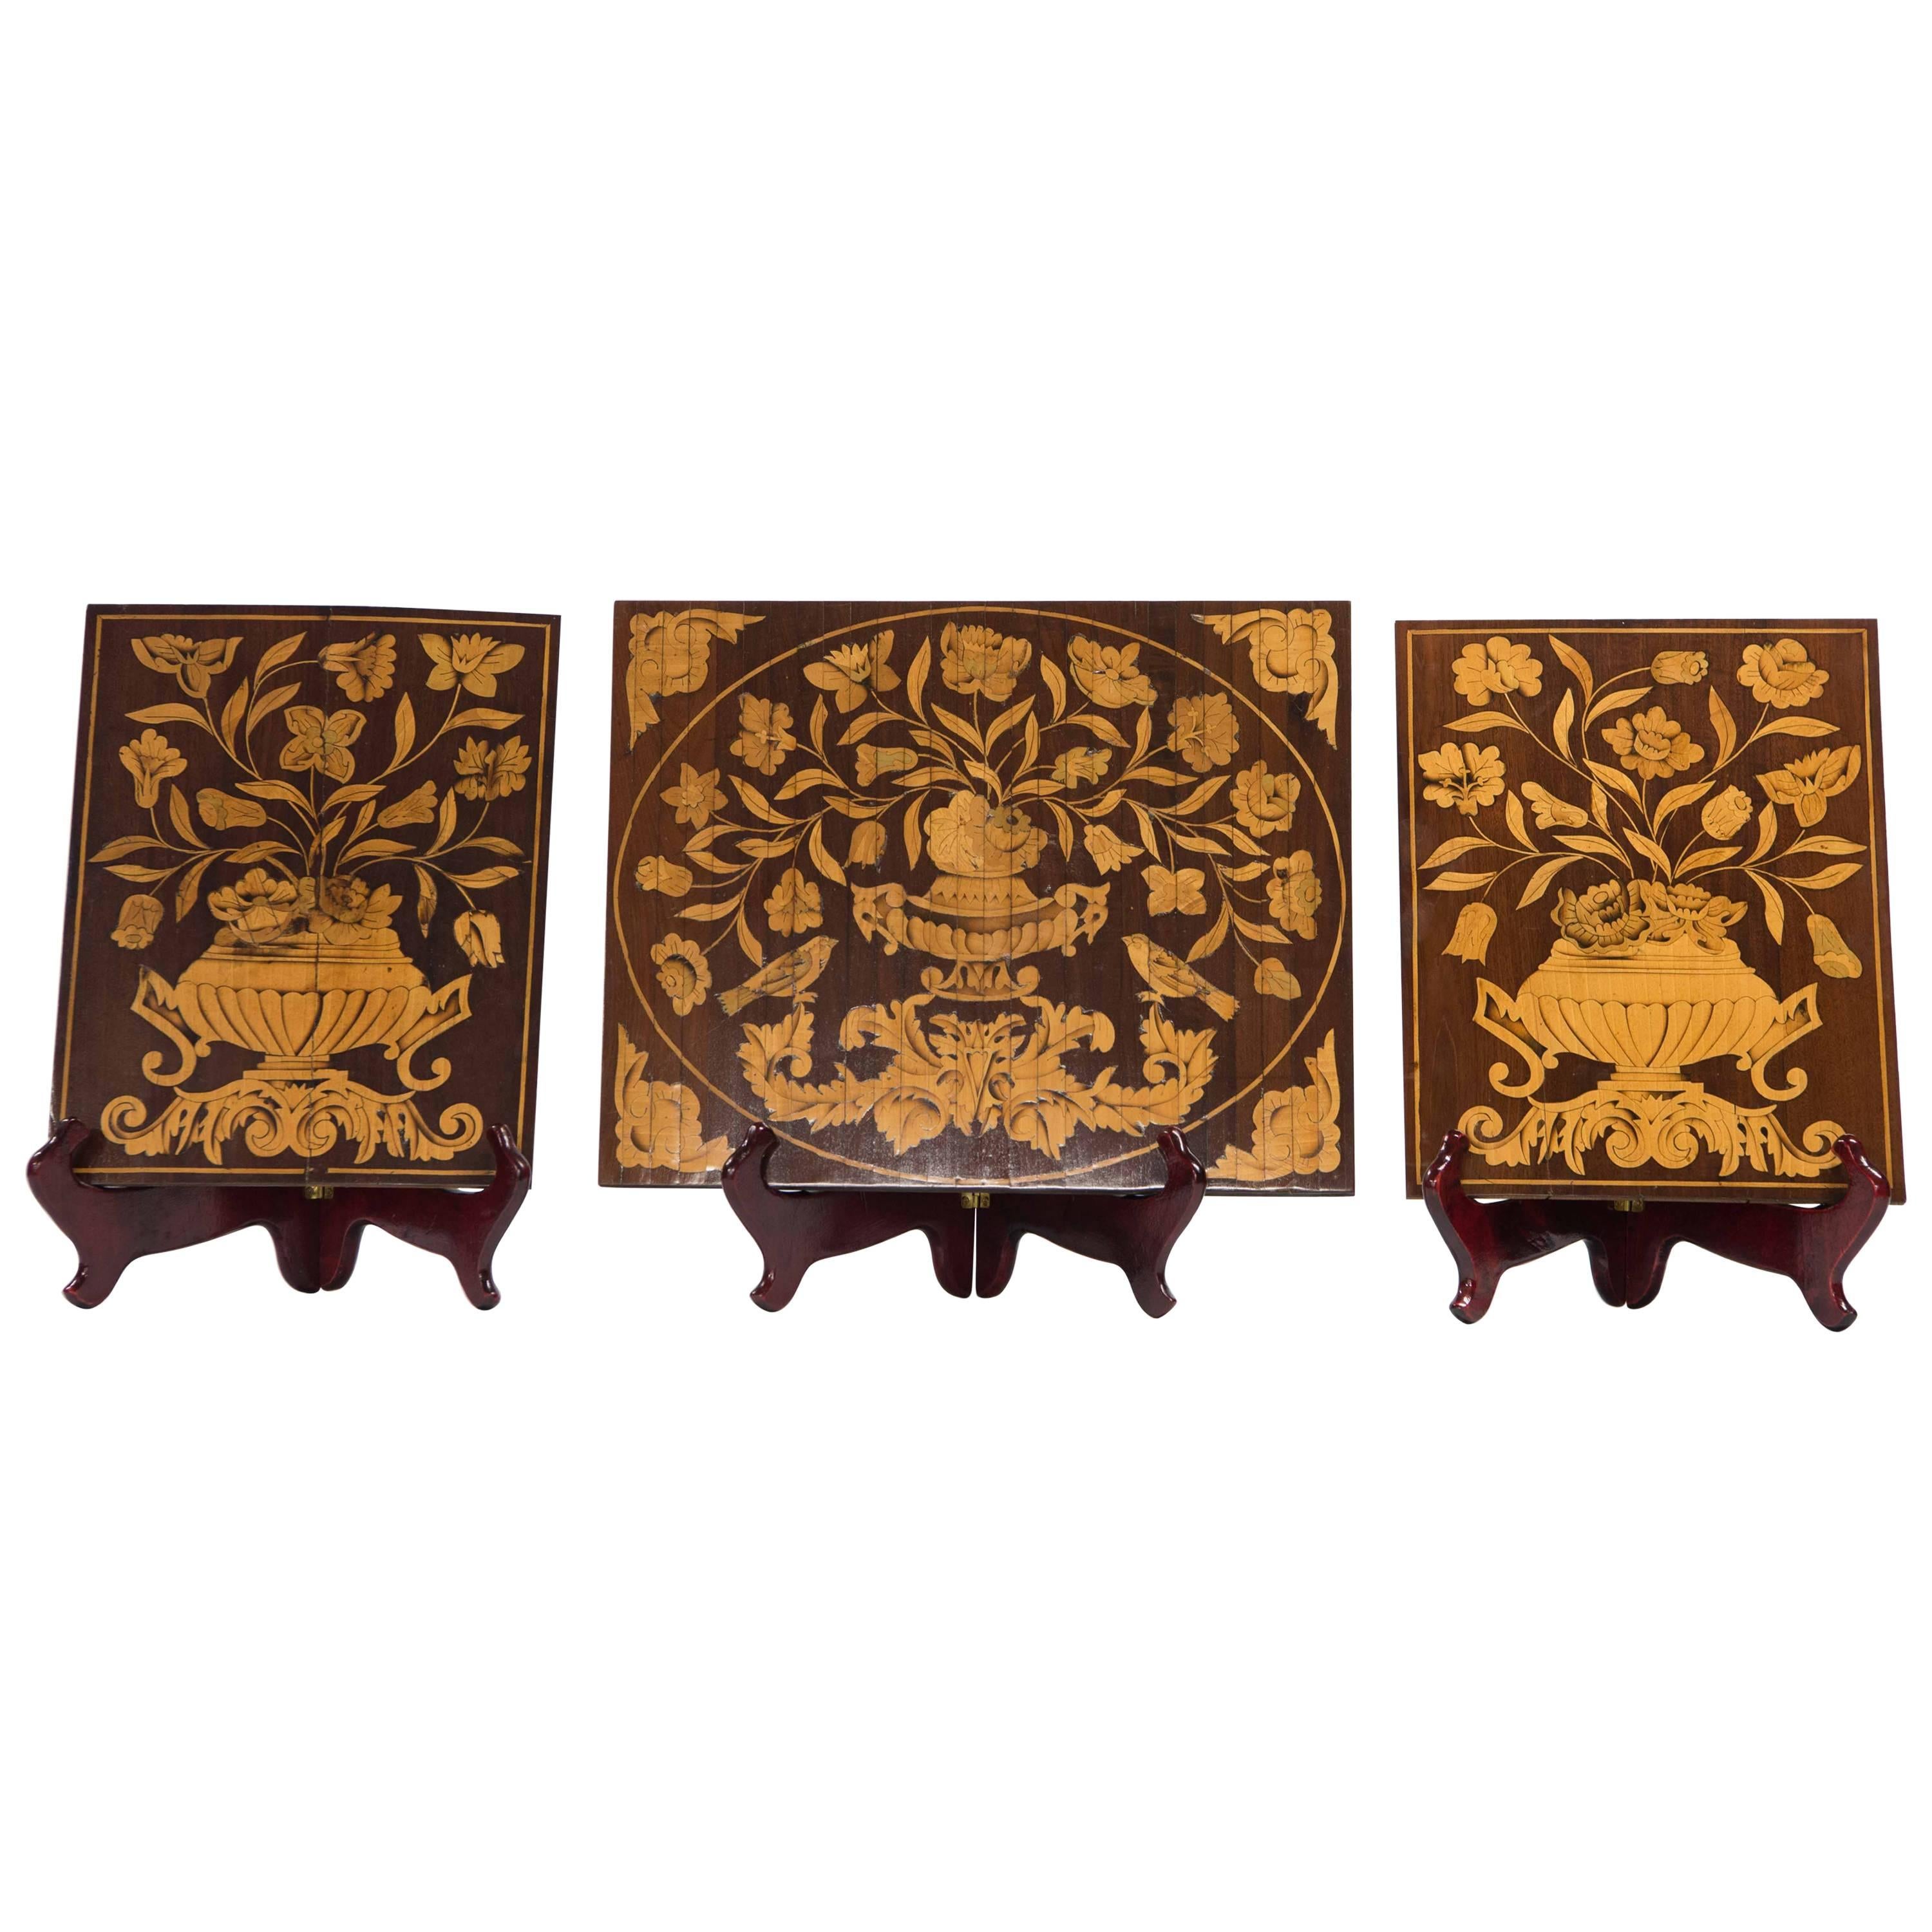 Set of Three Panels in Wood with Marquetry Inlay, Flower Patterns, 19th Century 